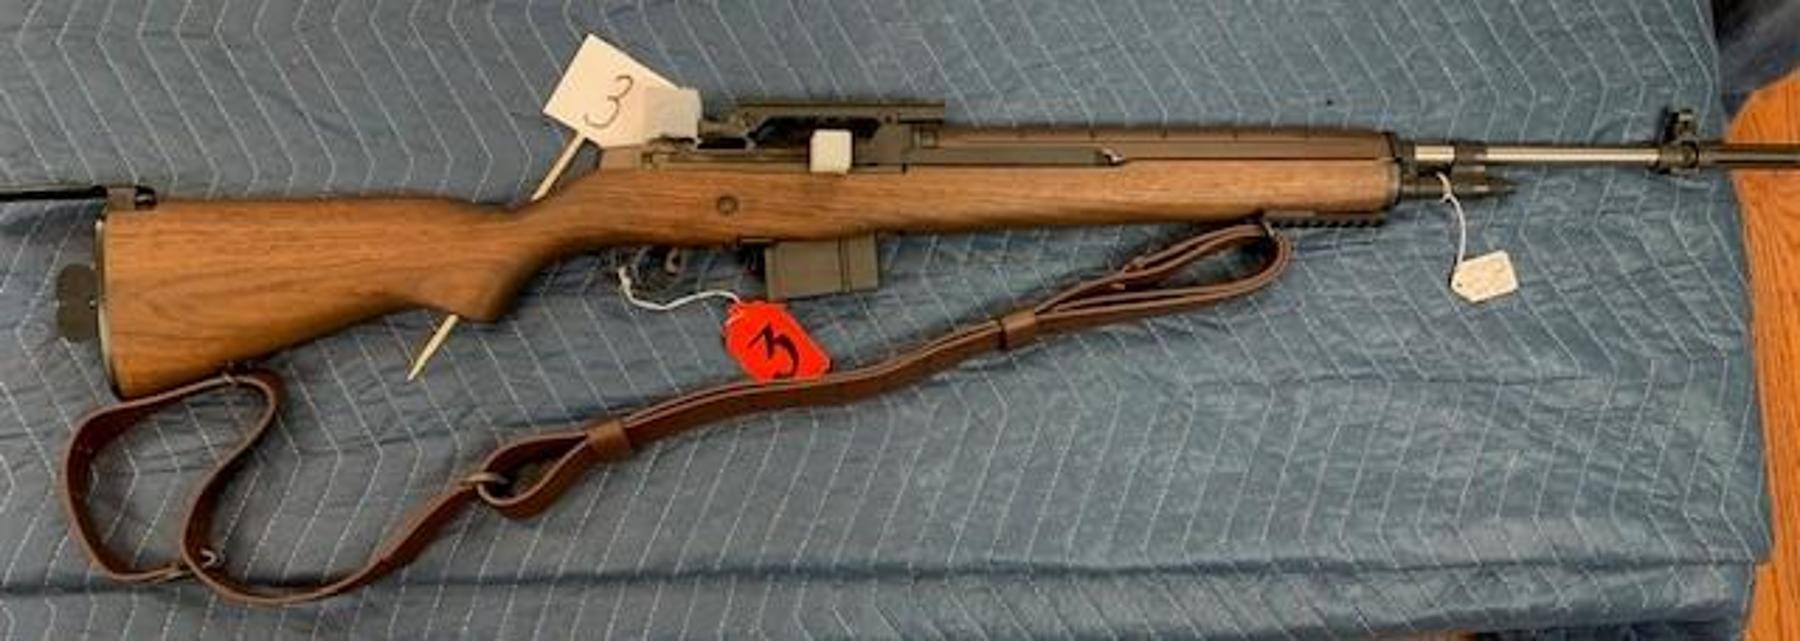 Firearm Collection Part 3, WWII Guns and Bayonets